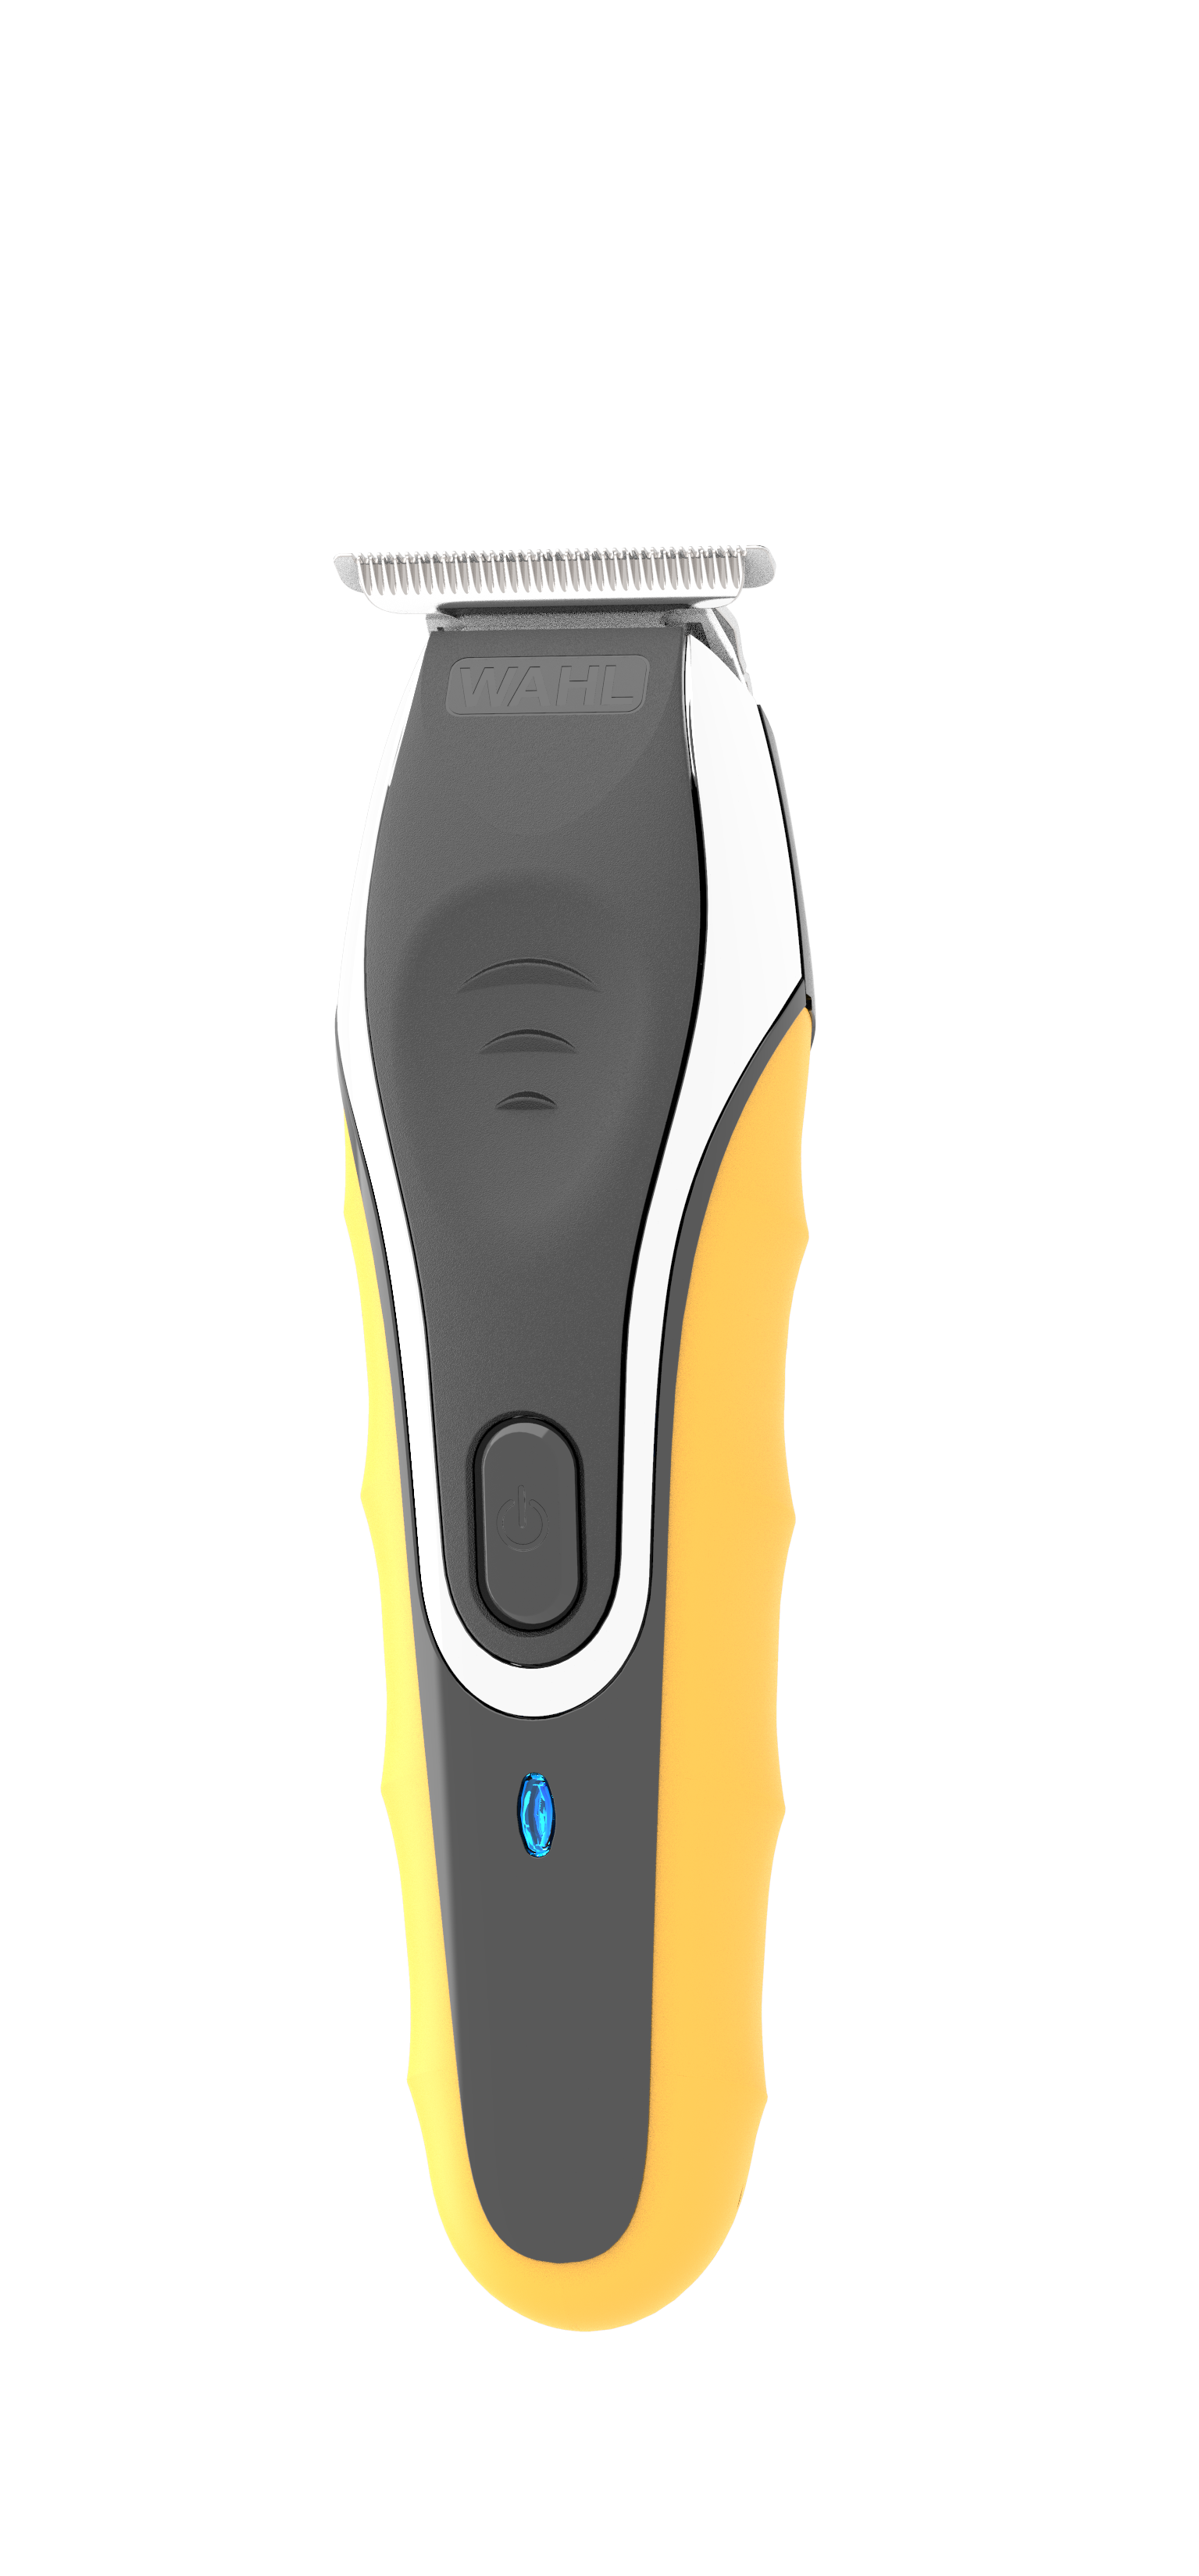 Wahl LifeProof Wet/Dry Rechargeable Lithium Ion Trimmer for Men,  Black/Yellow, 9899